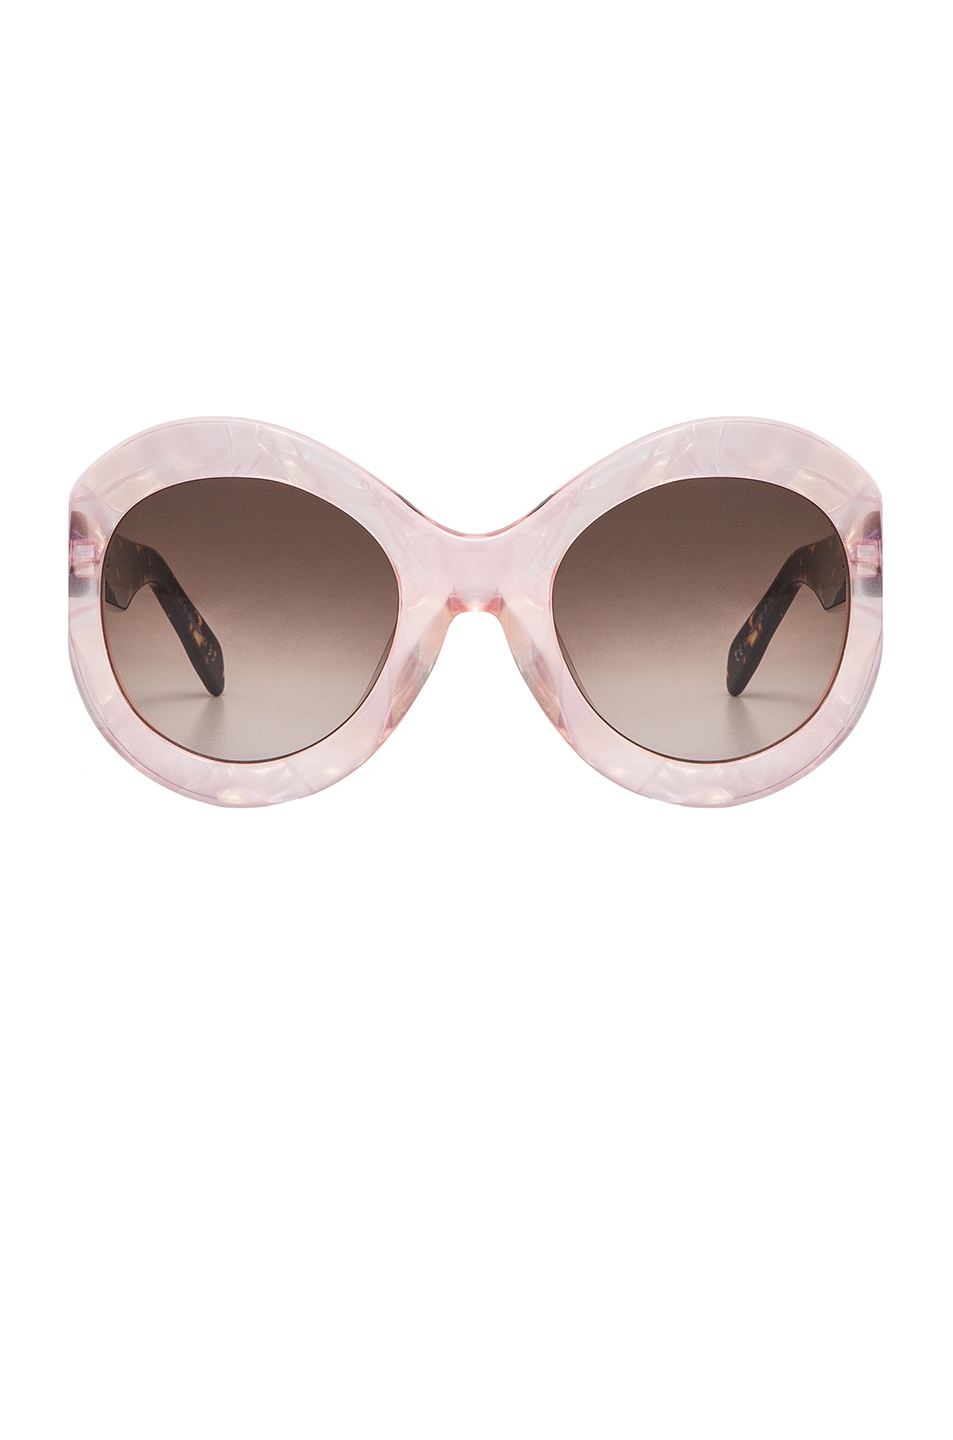 Image 1 of Zanzan Le Tabou Sunglasses in Pink Opal & Treacle Brown